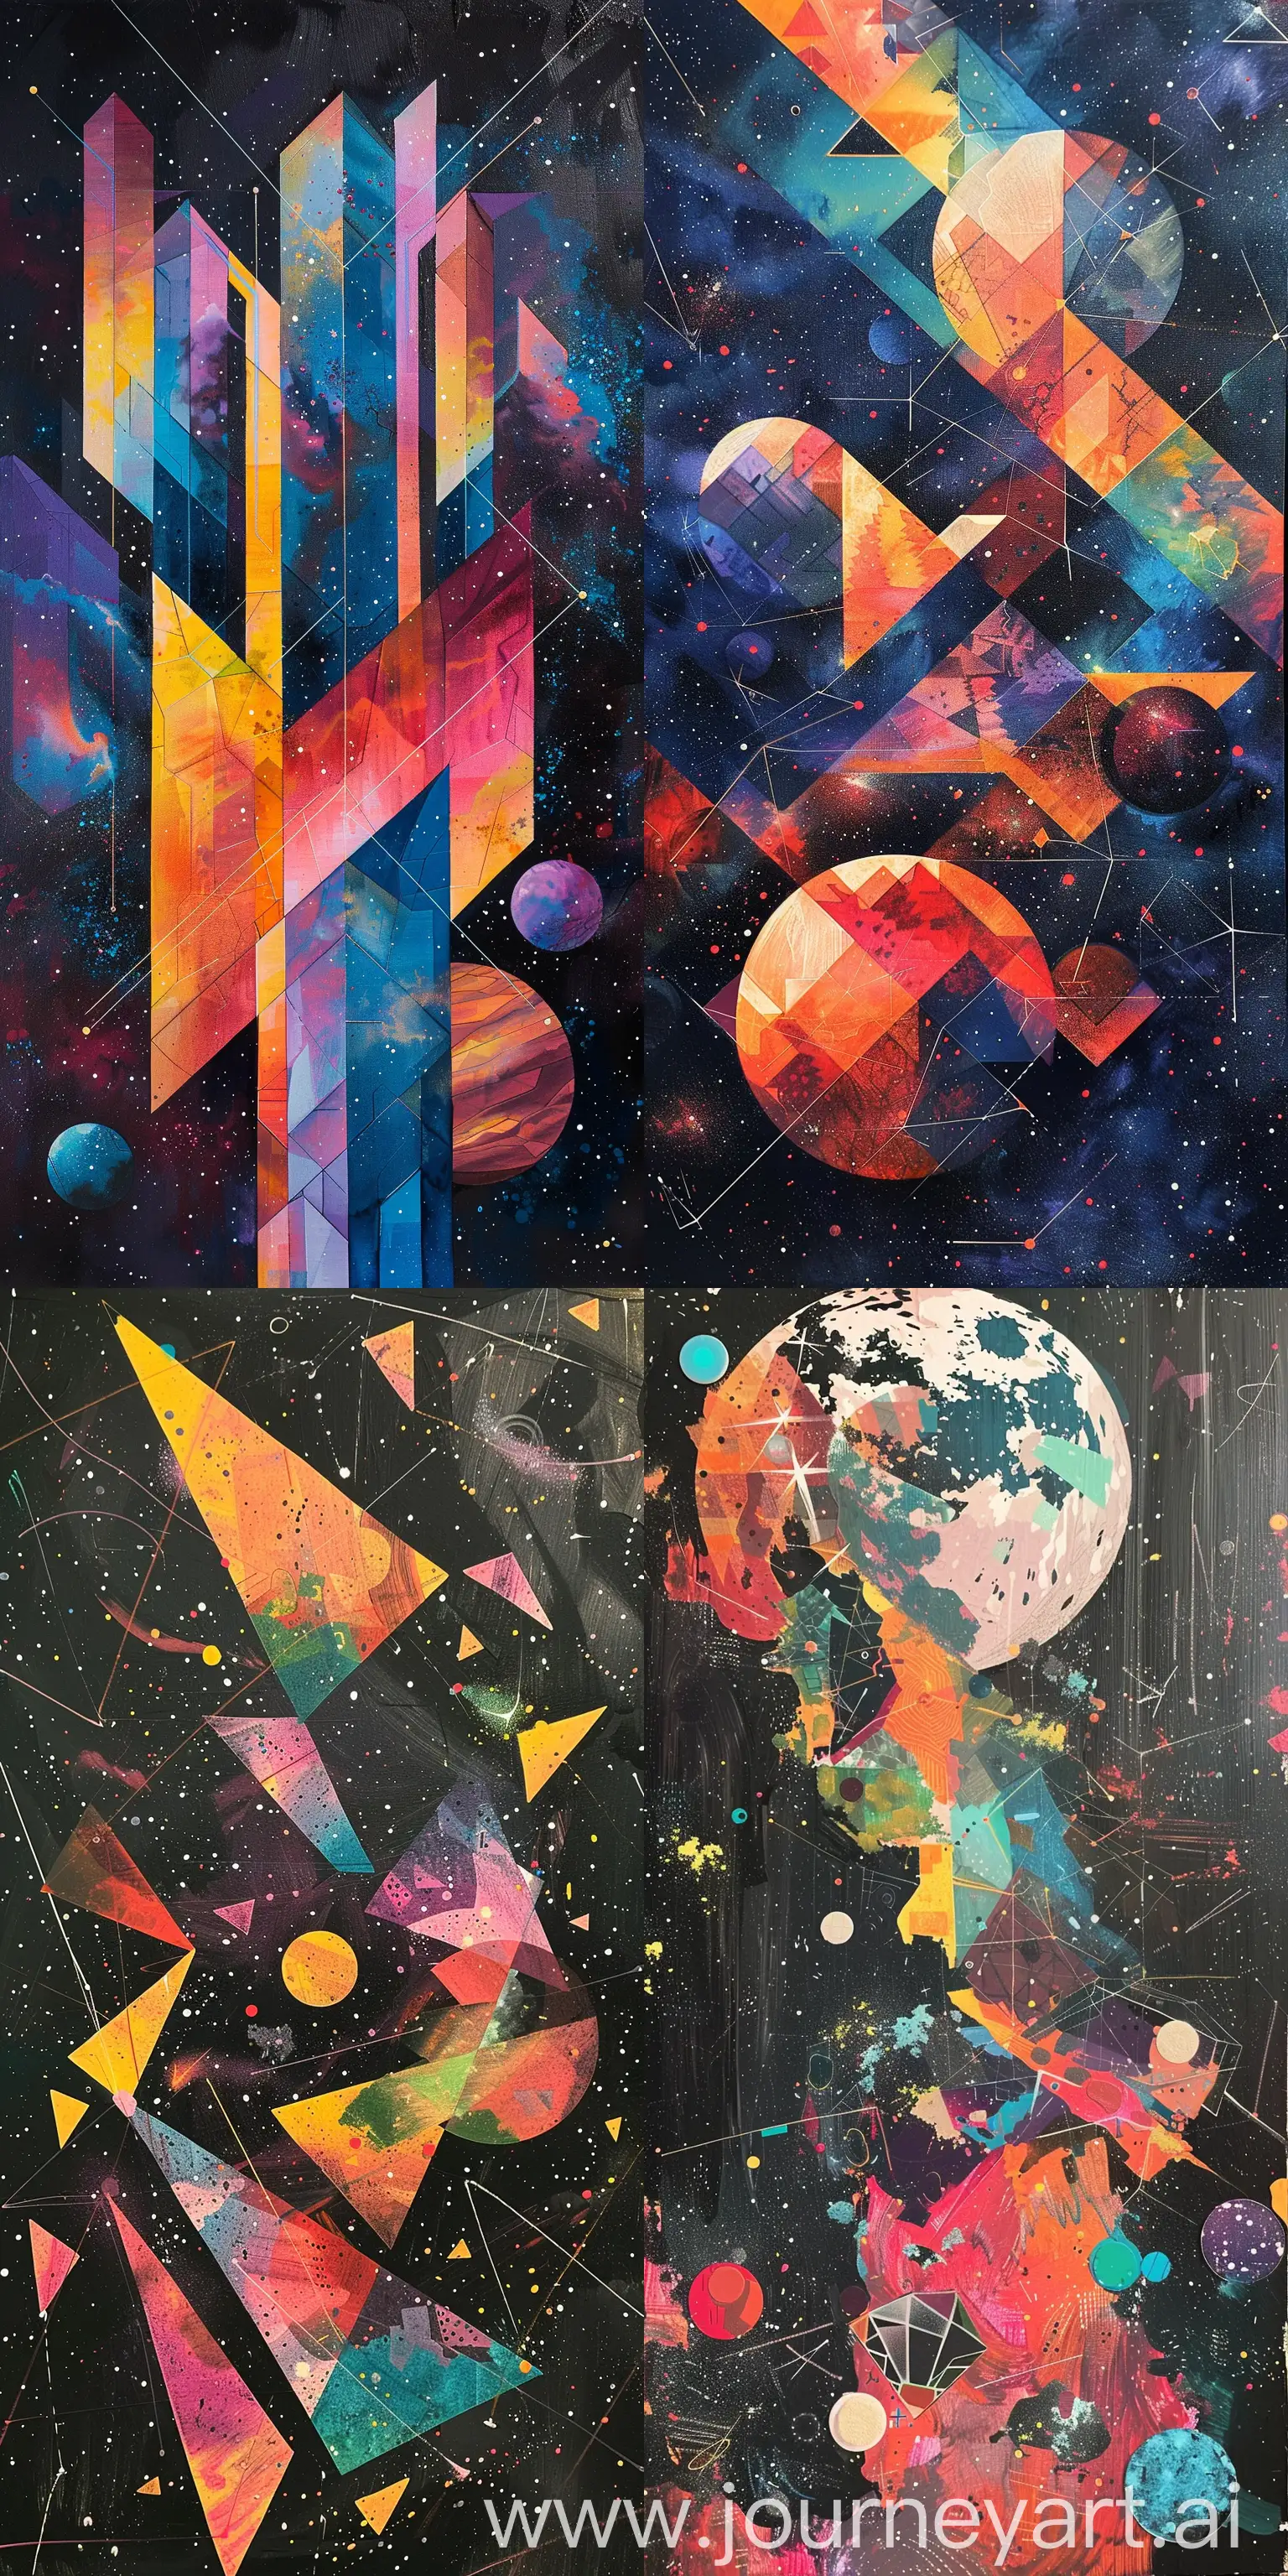 Abstract-Geometric-Space-Sketches-Acrylic-Tones